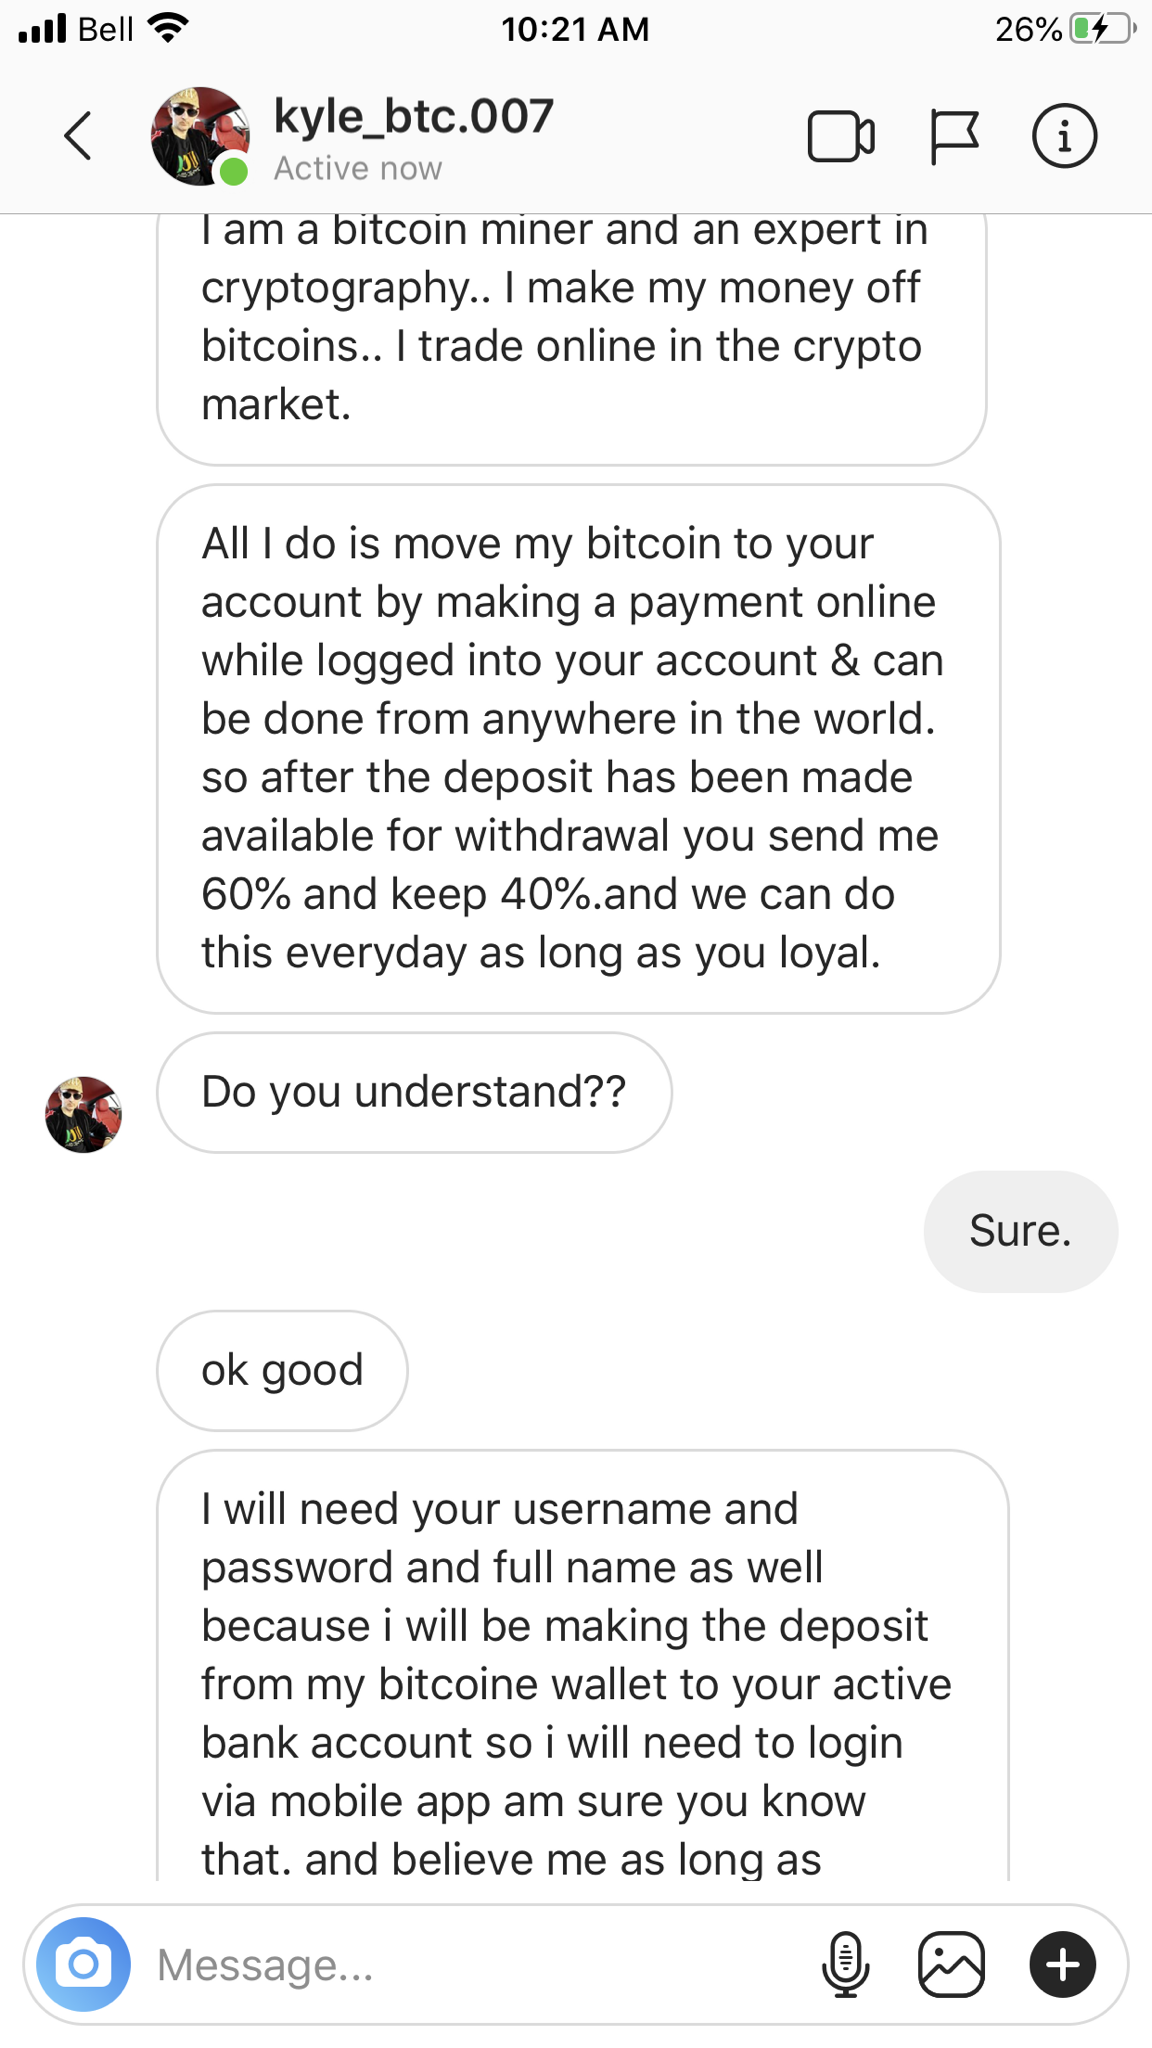 screenshot - il Bell 26% kyle_btc.007 Active now I am a bitcoin miner and an expert in cryptography.. I make my money off bitcoins.. I trade online in the crypto market. All I do is move my bitcoin to your account by making a payment online while logged i